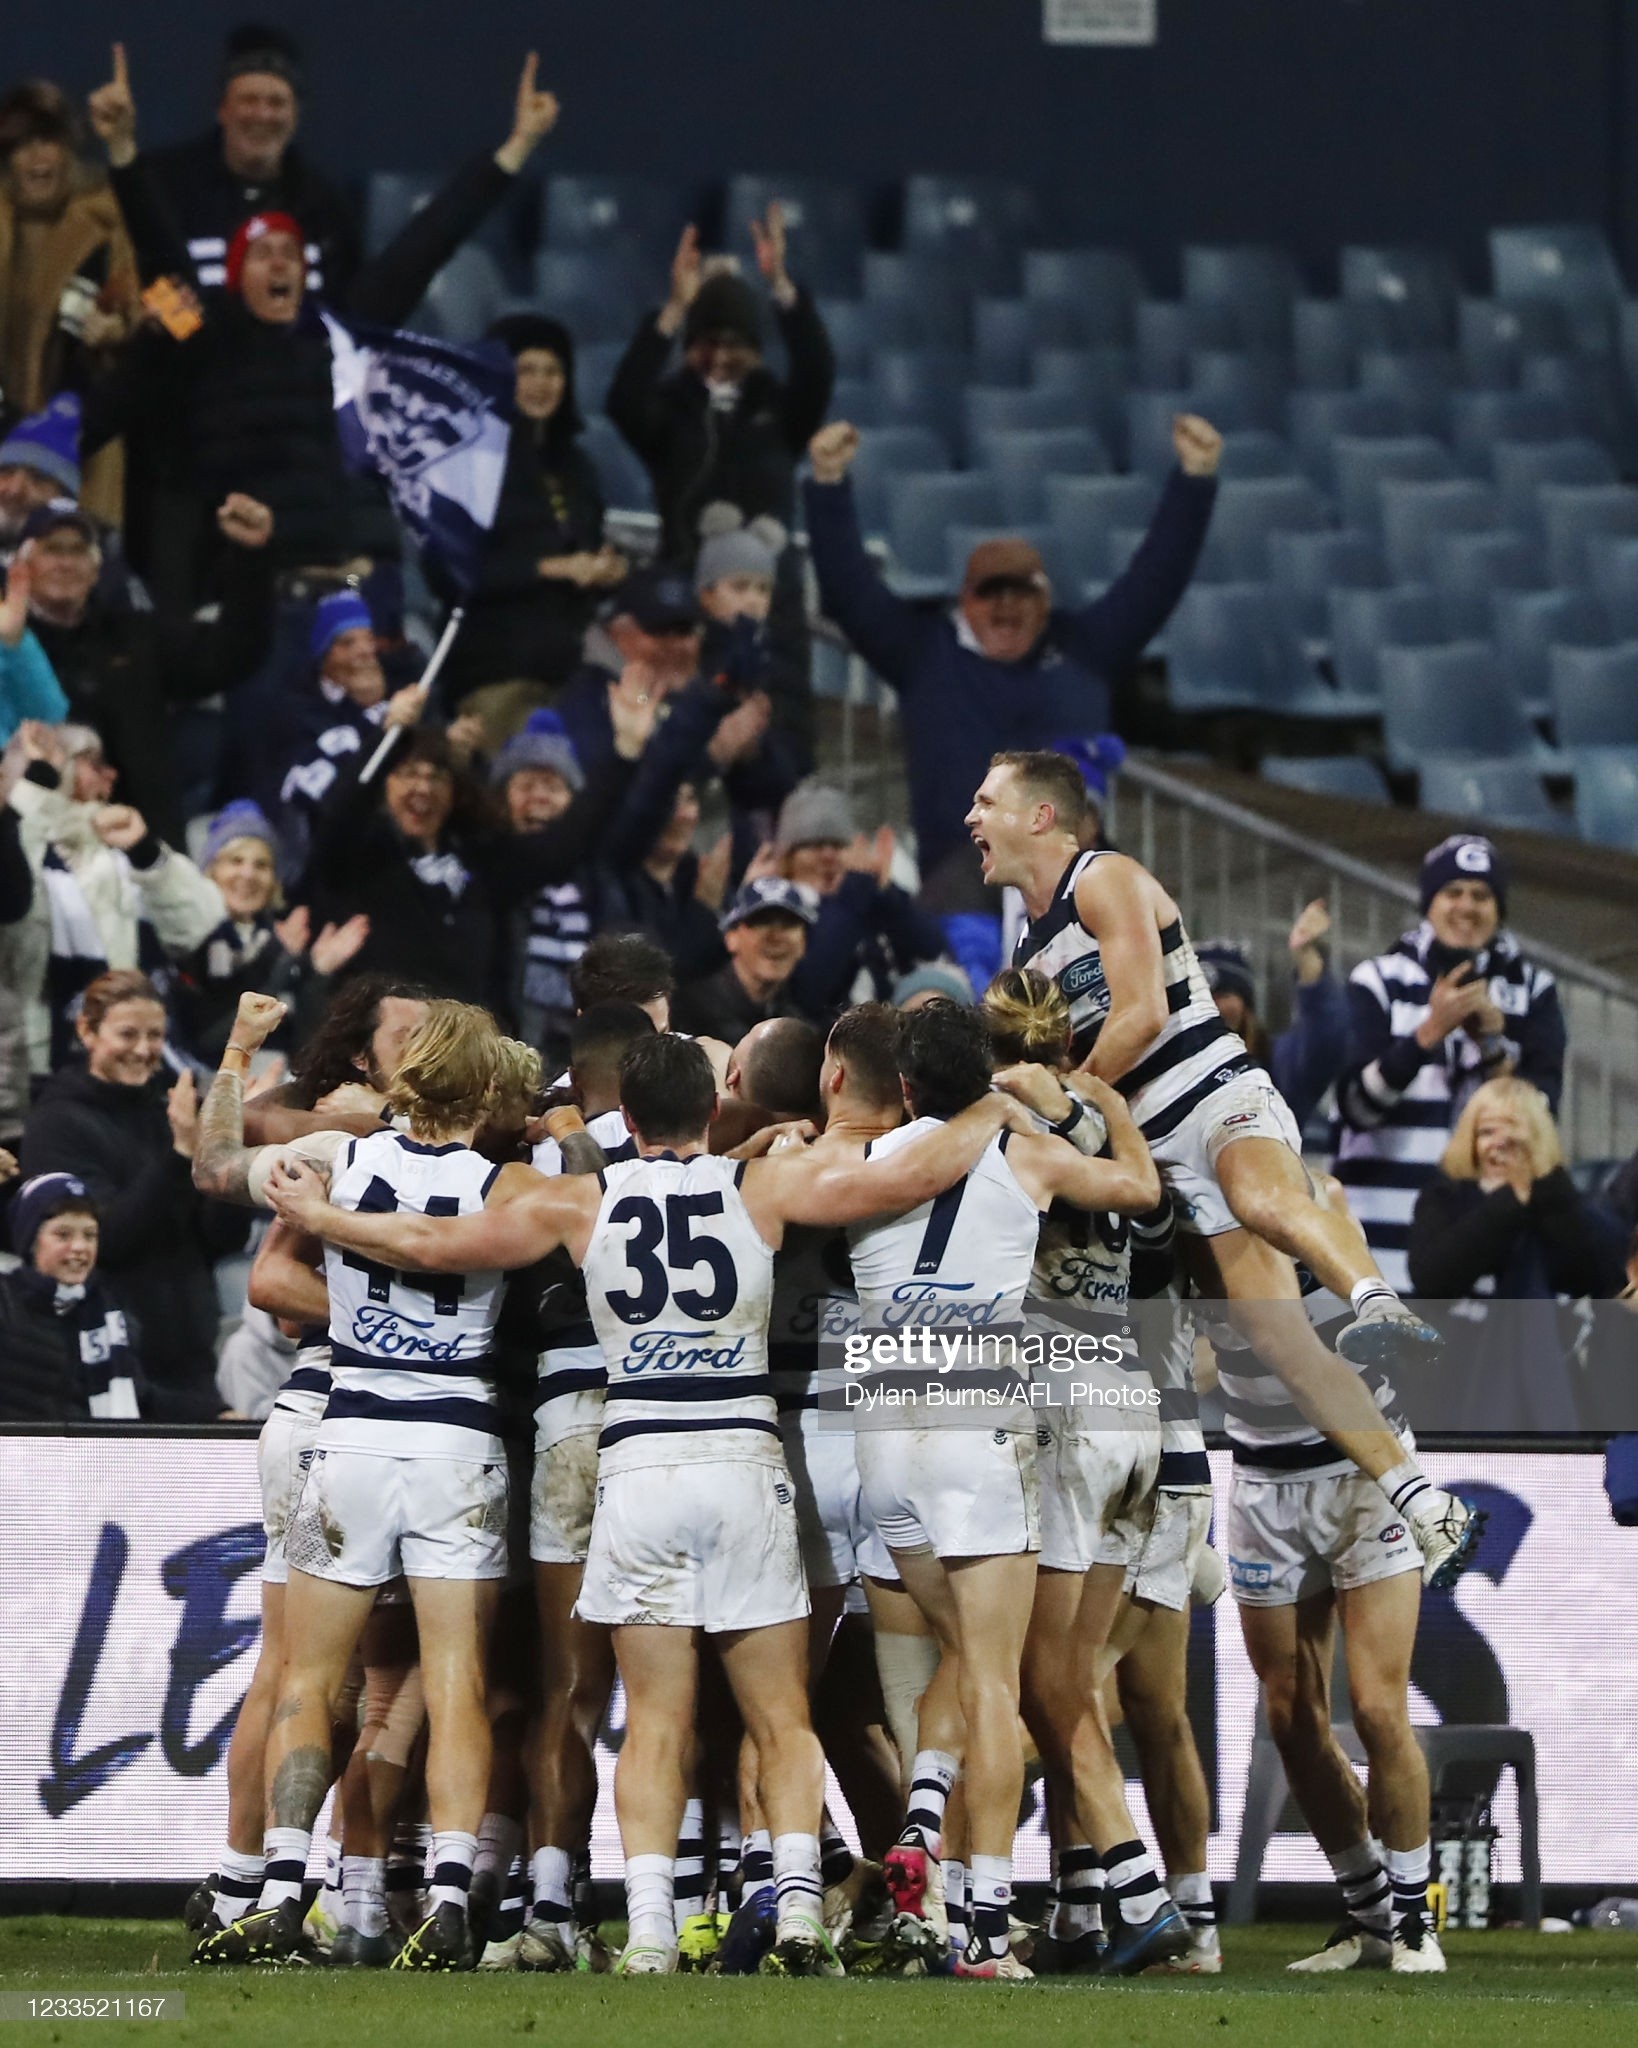 gary-rohan-of-the-cats-celebrates-with-teammates-after-kicking-a-goal-picture-id1233521167